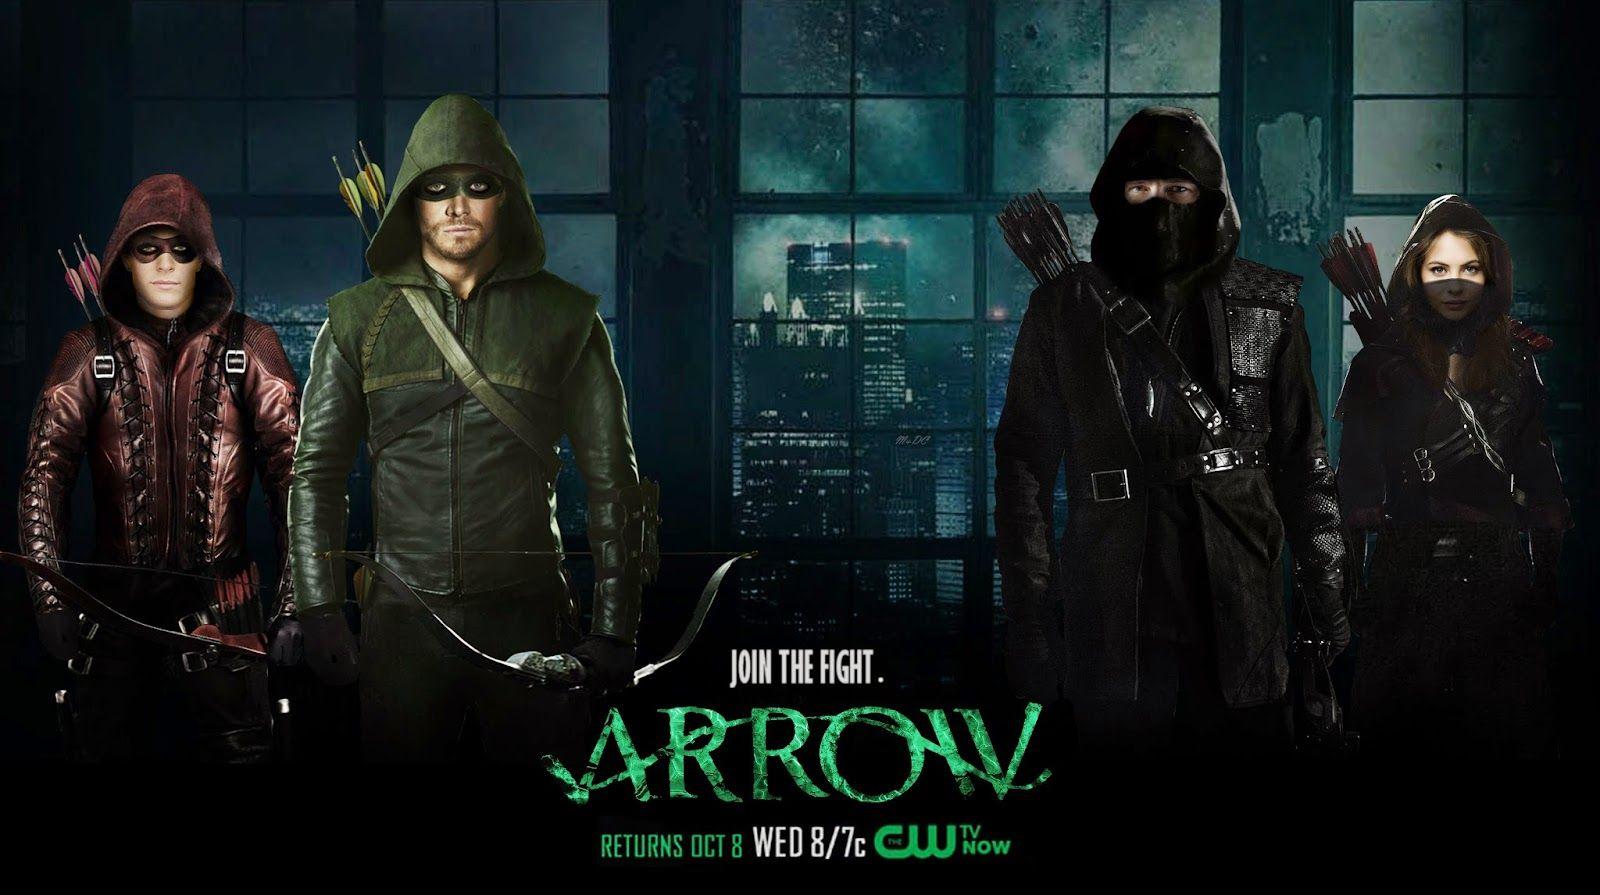 NGN MOVIE & TV ARTICLES ARROW HITS ITS MARK ONCE AGAIN